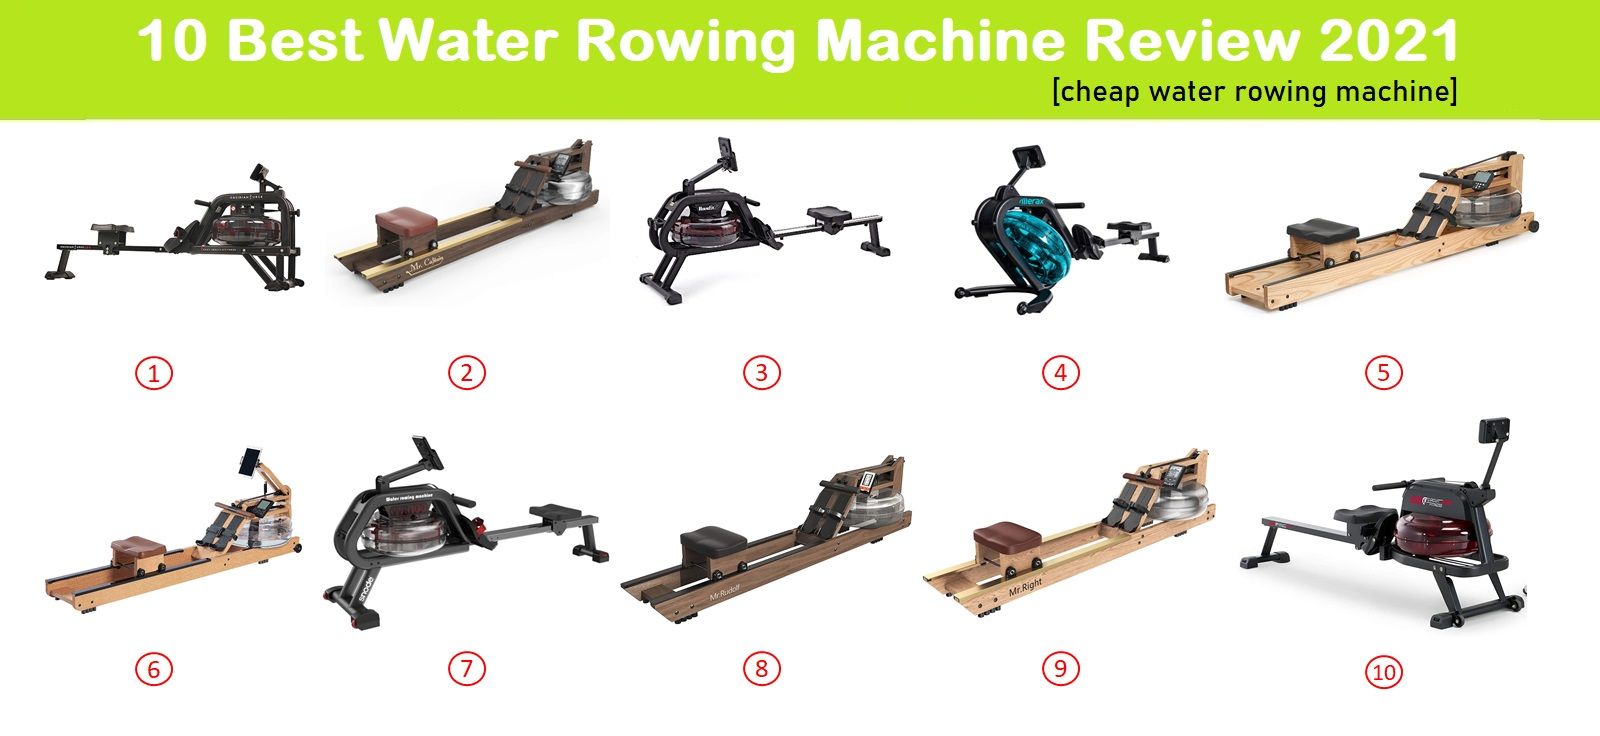 10 Best Water Rowing Machines 2021 Review & Comparison